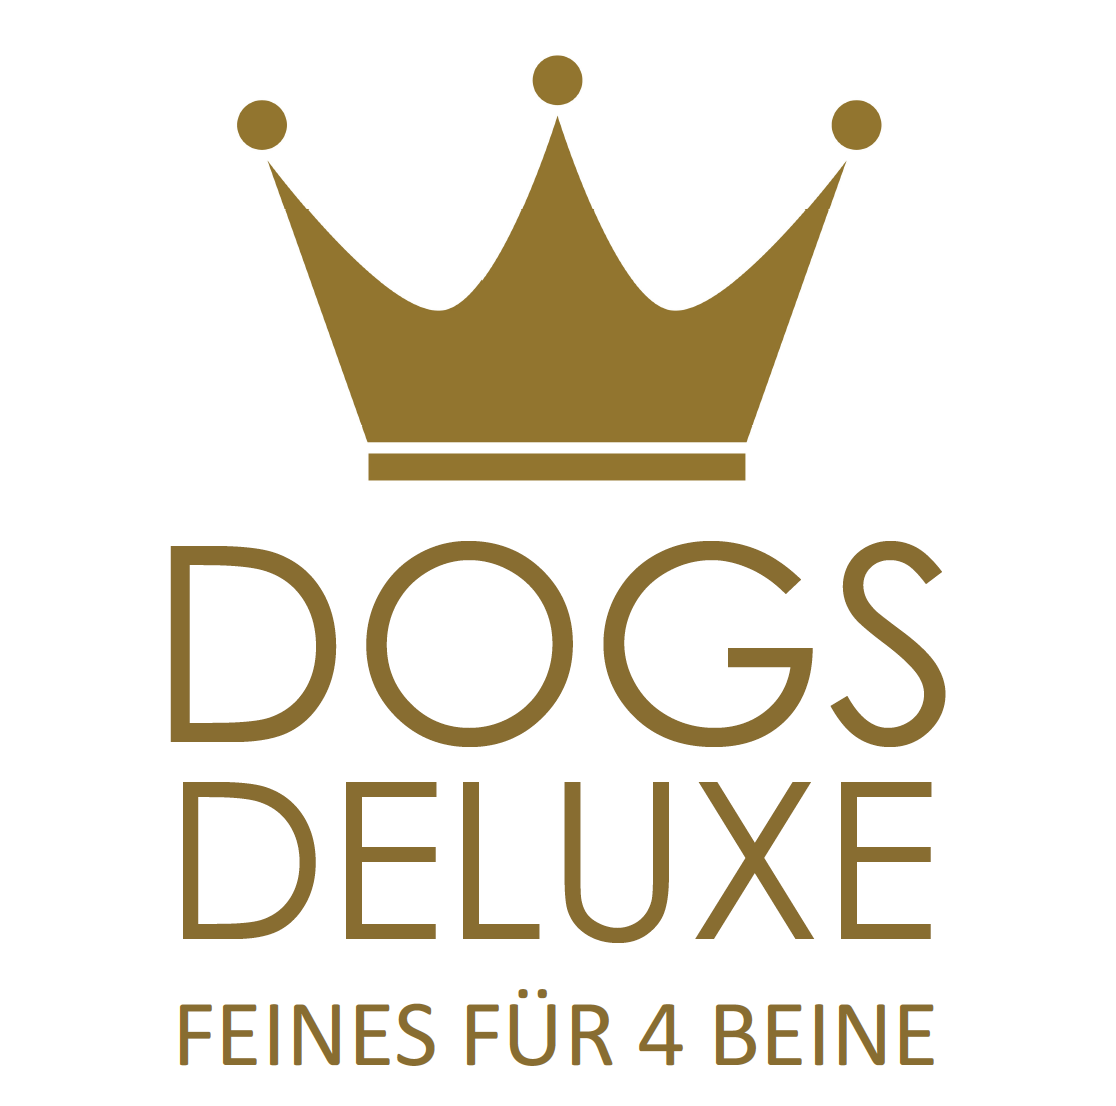 DOGS DELUXE